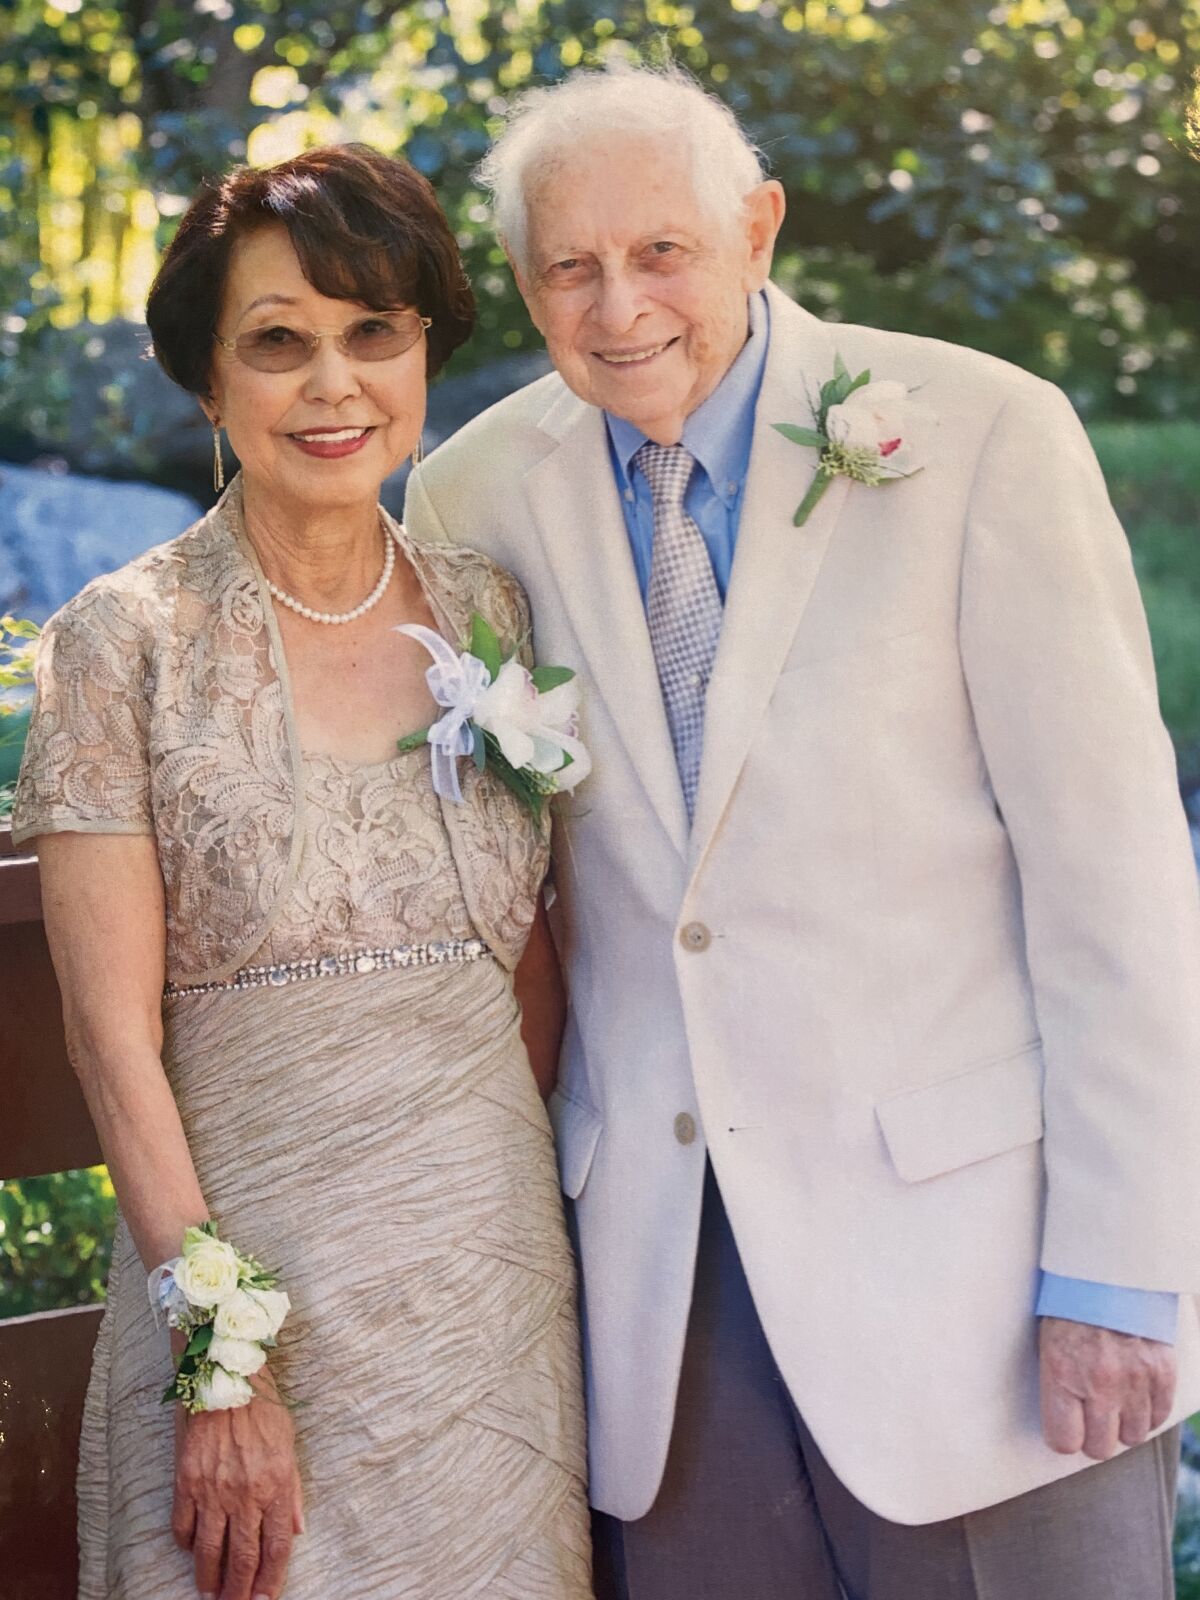 Peter Manes and his second wife, Yoko Sakaguchi, on their wedding day in 2014.